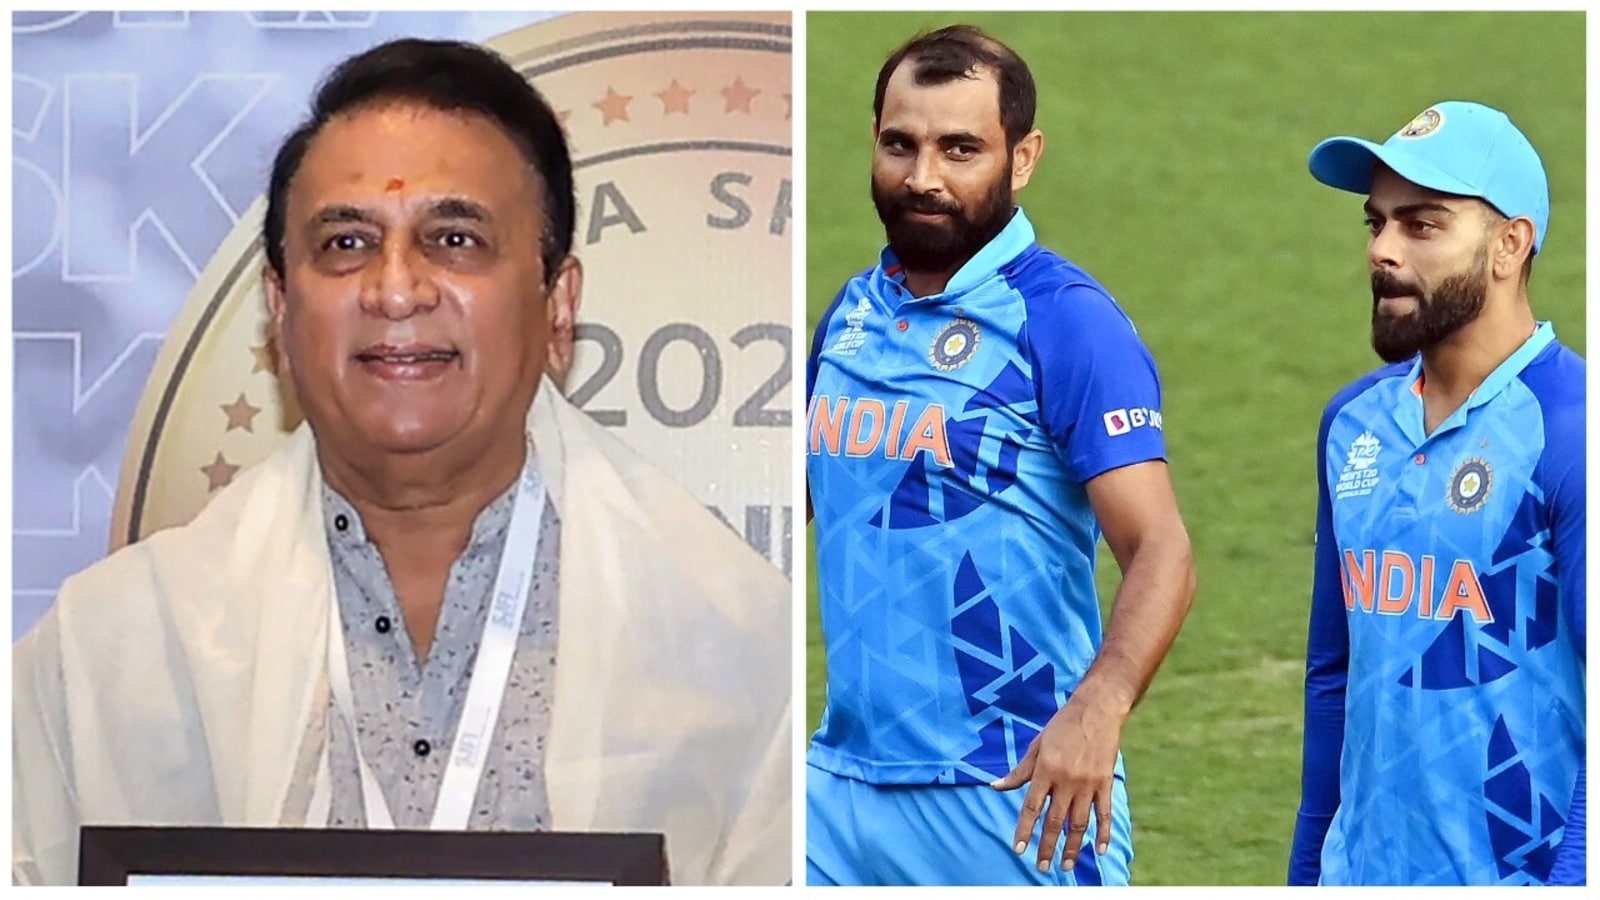 england-will-go-through-sunil-gavaskar-moody-come-up-with-identical-picks-for-icc-t20-world-cup-final